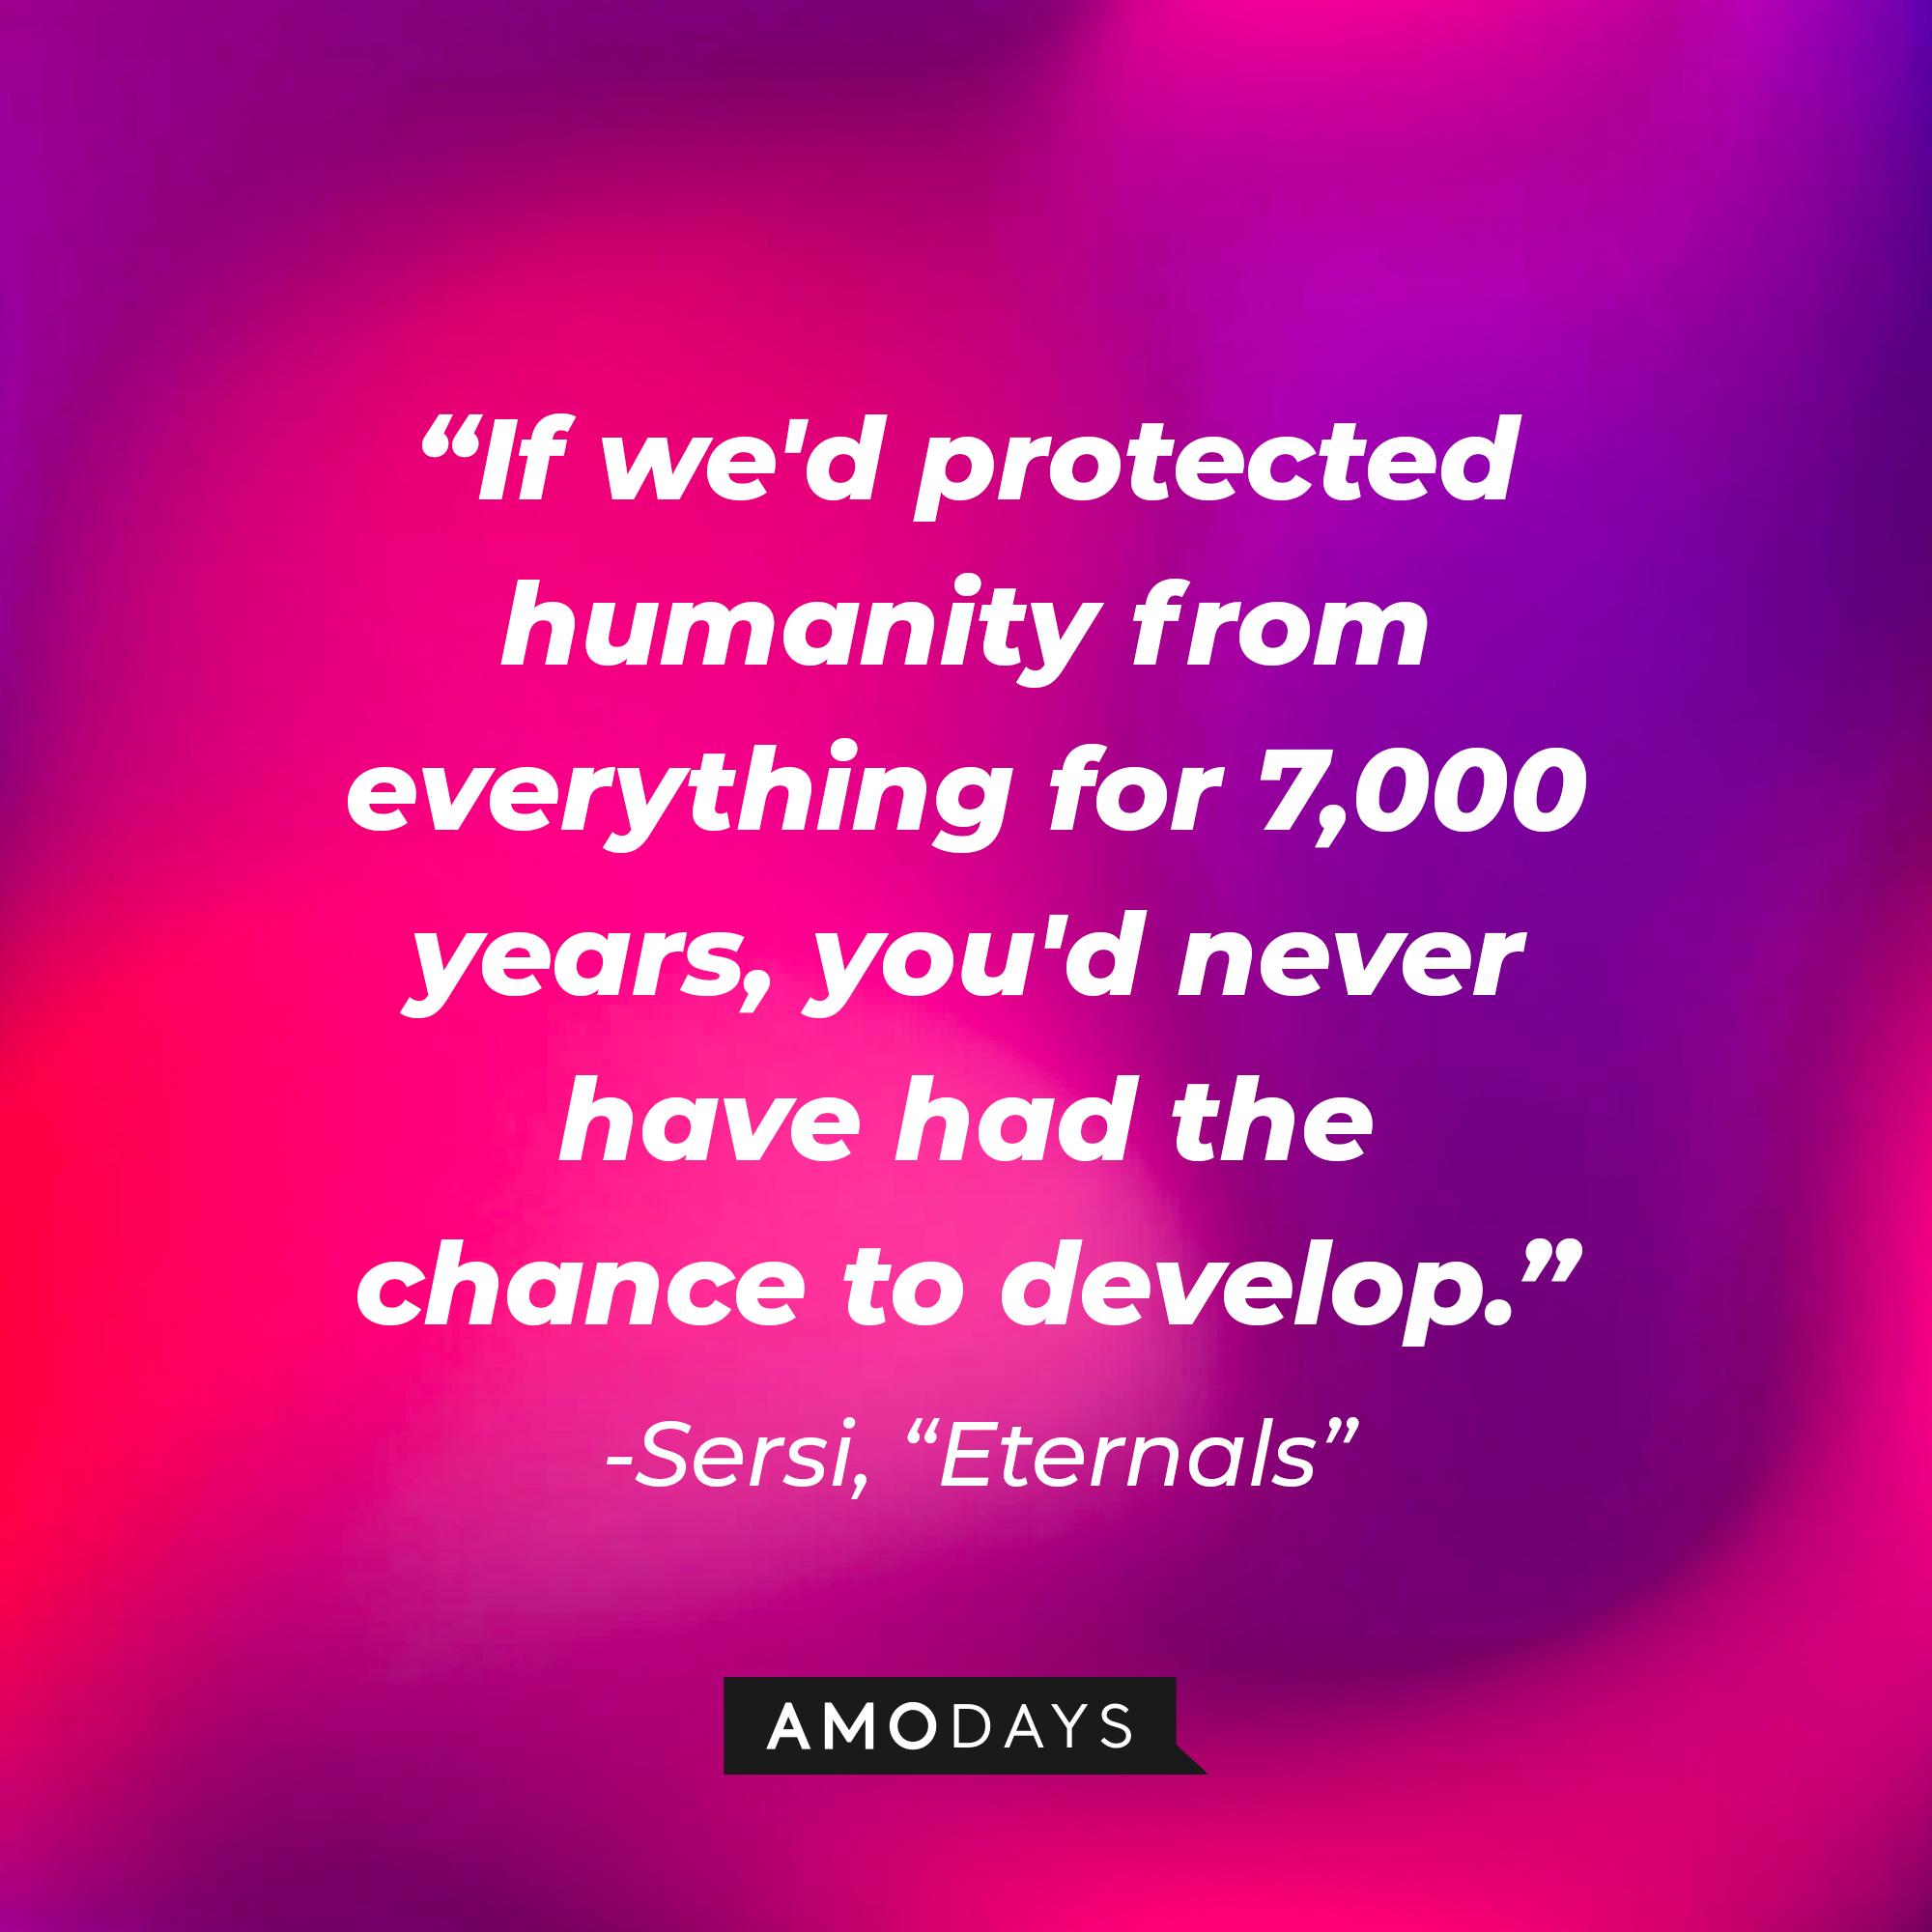 Sersi’s quote: "If we'd protected humanity from everything for 7,000 years, you'd never have had the chance to develop." | Image: AmoDays